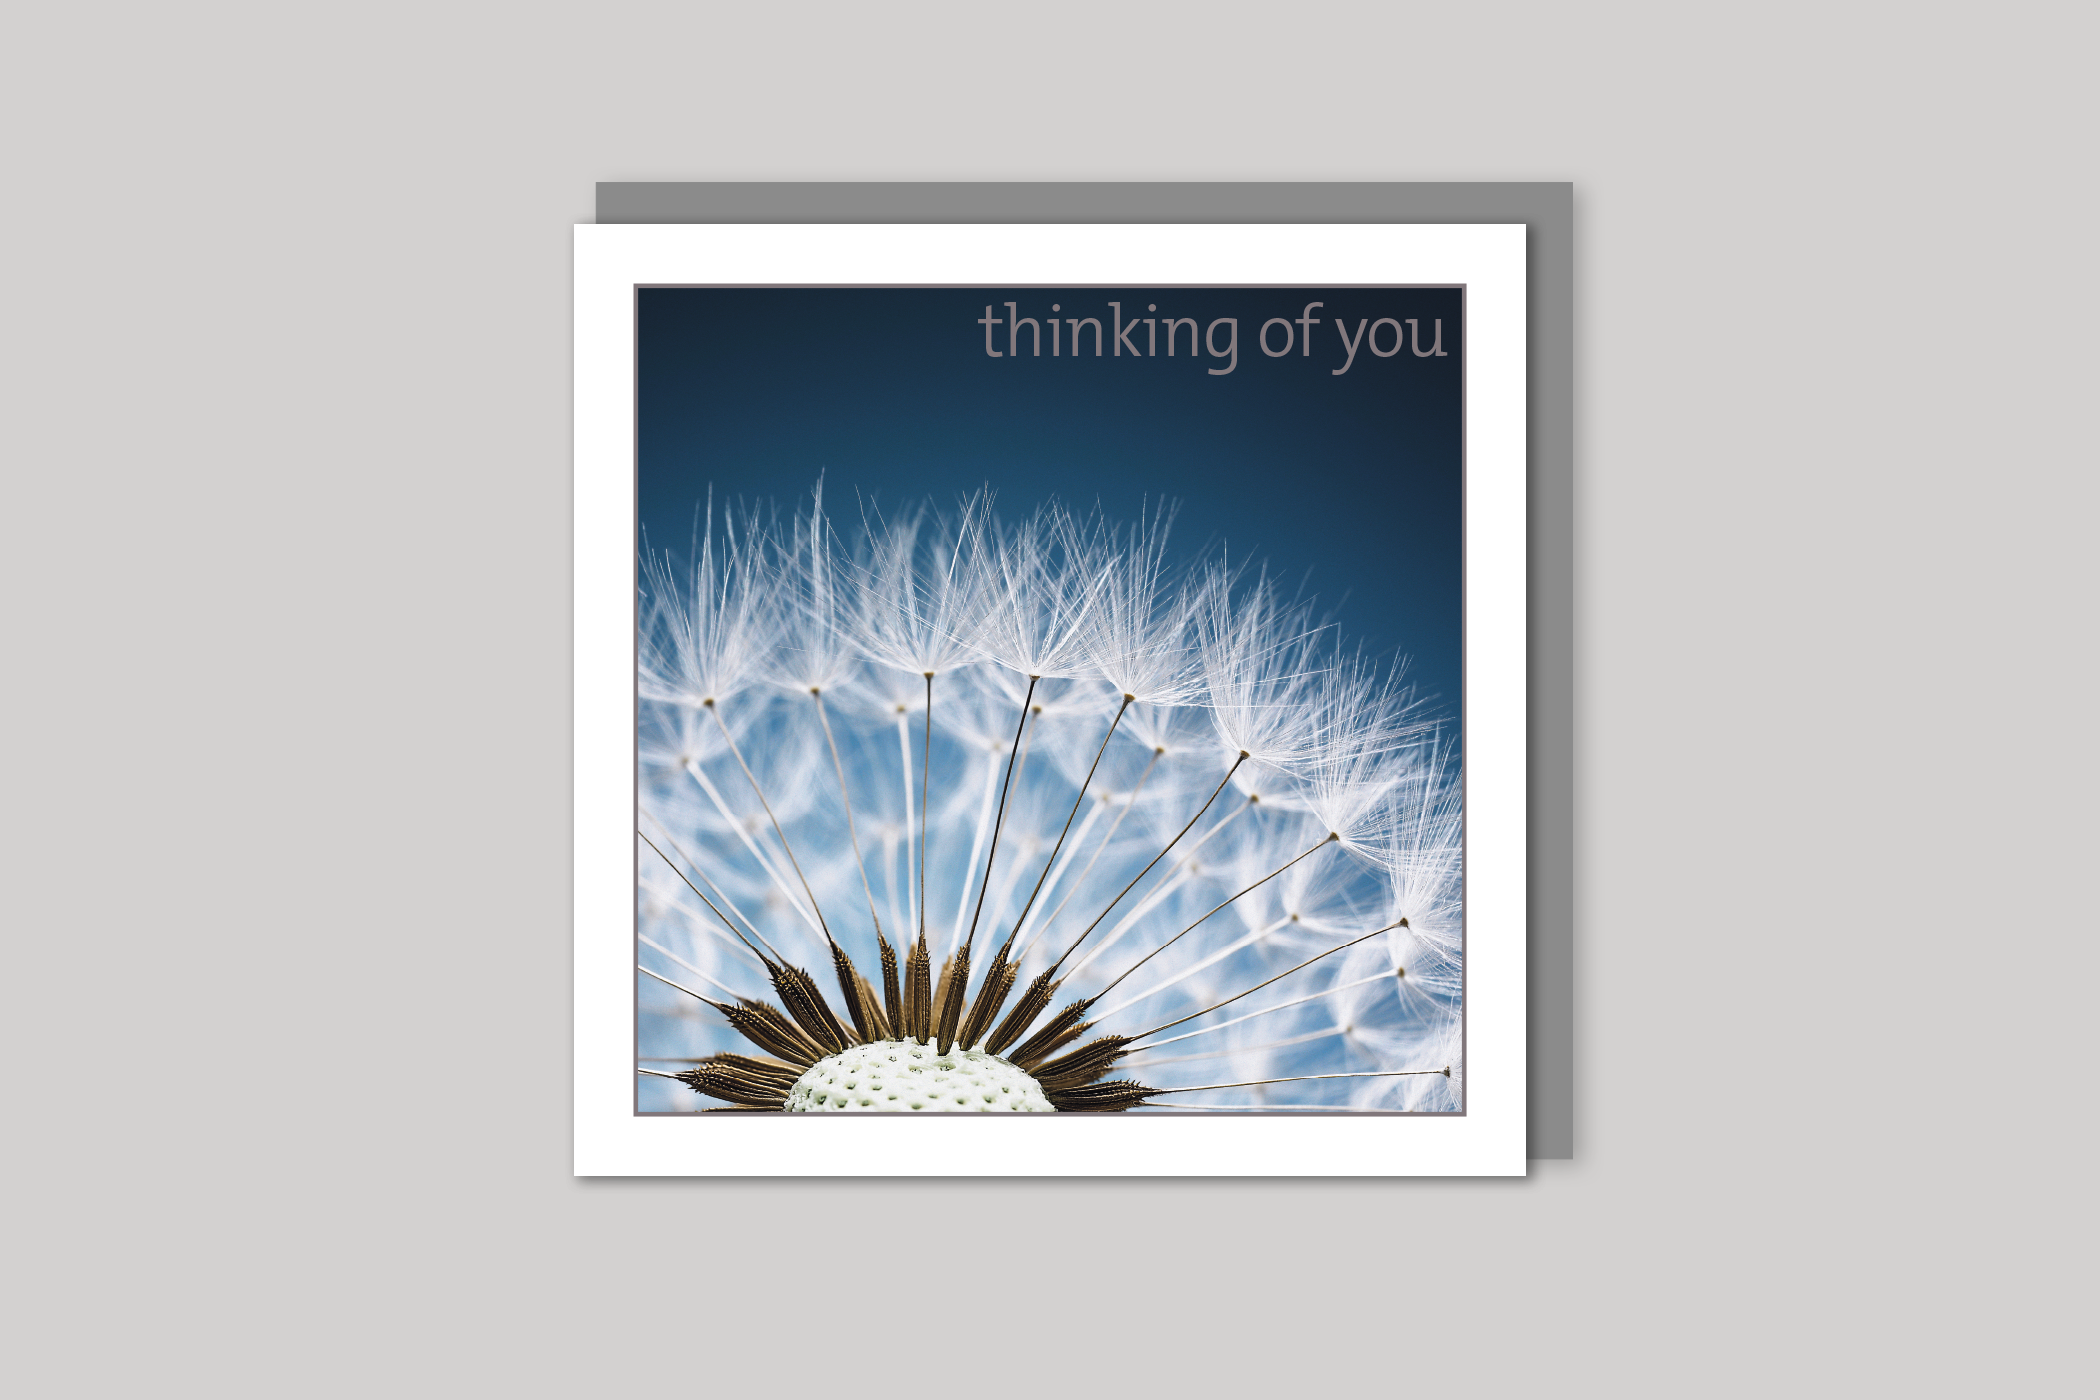 Dandelion thinking of you card from Exposure Silver Edition range of greeting cards by Icon, back page.